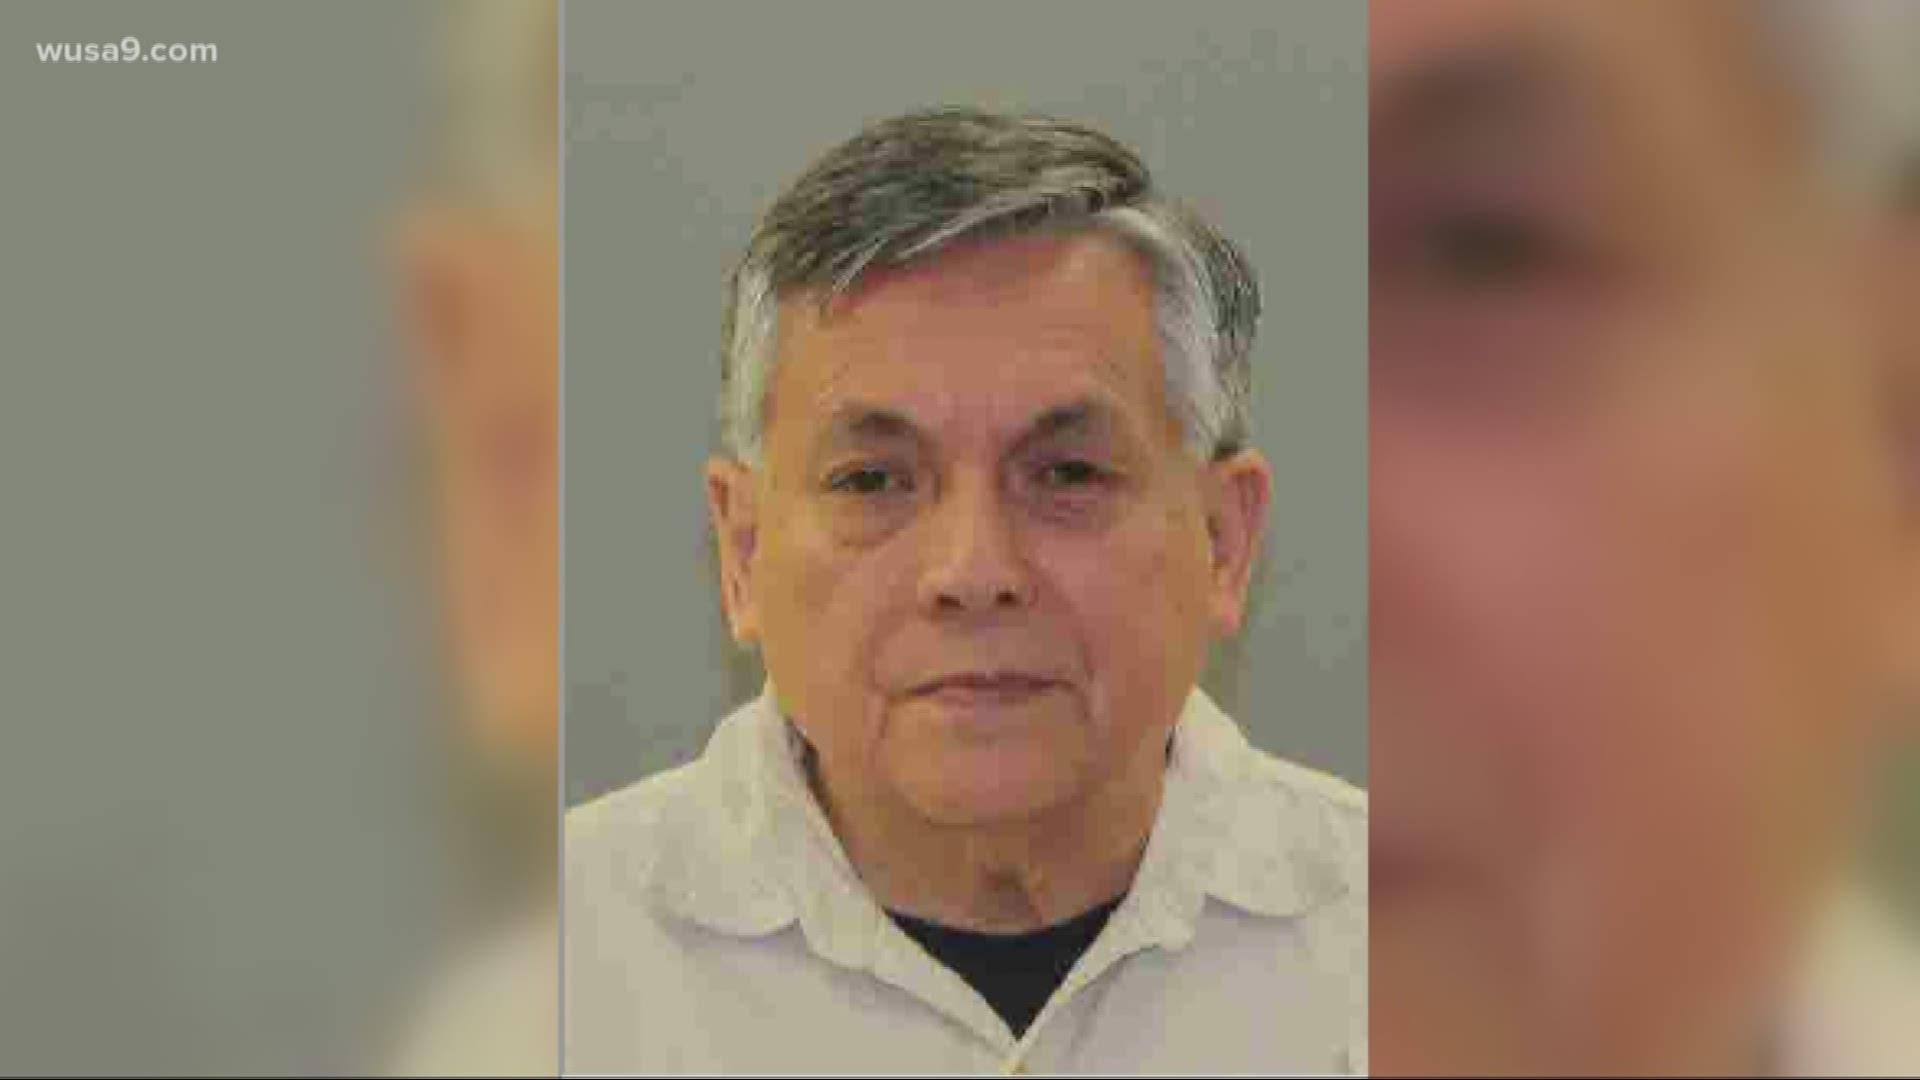 A Maryland pediatrician is accused of sexually assaulting a patient. 68-year-old Doctor Ernesto Torres is facing rape and assault charges after he allegedly assaulted an 18-year-old patient.